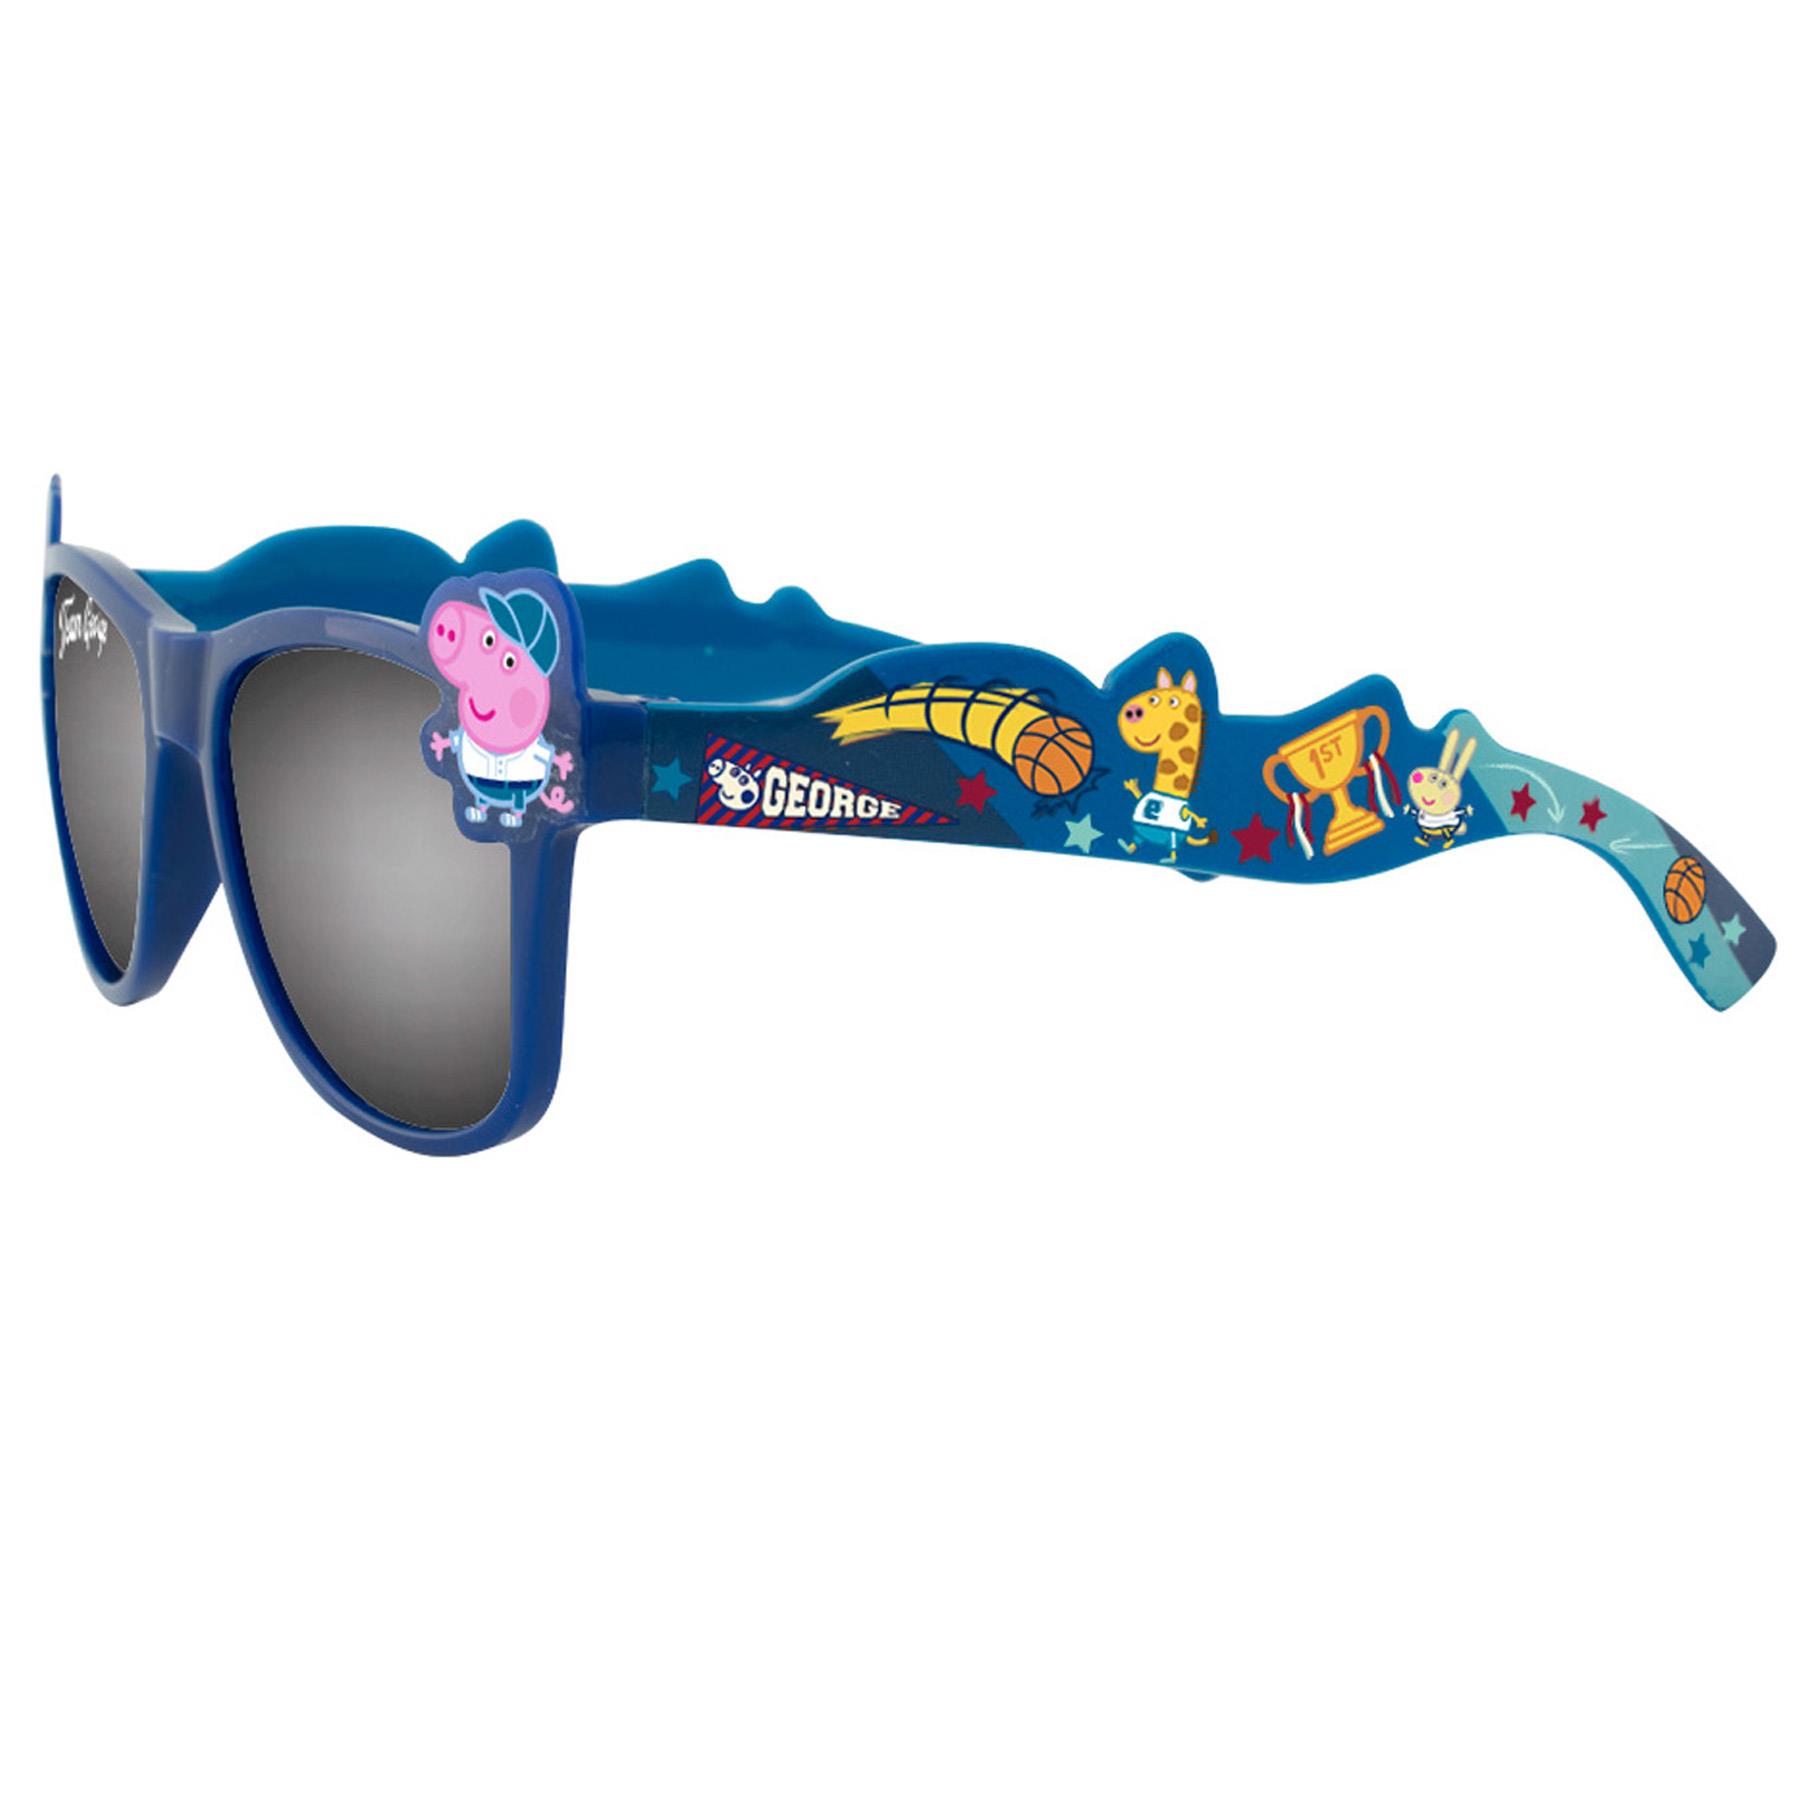 Peppa Pig Children's Character Sunglasses UV protection for Holiday George - PEPPA6